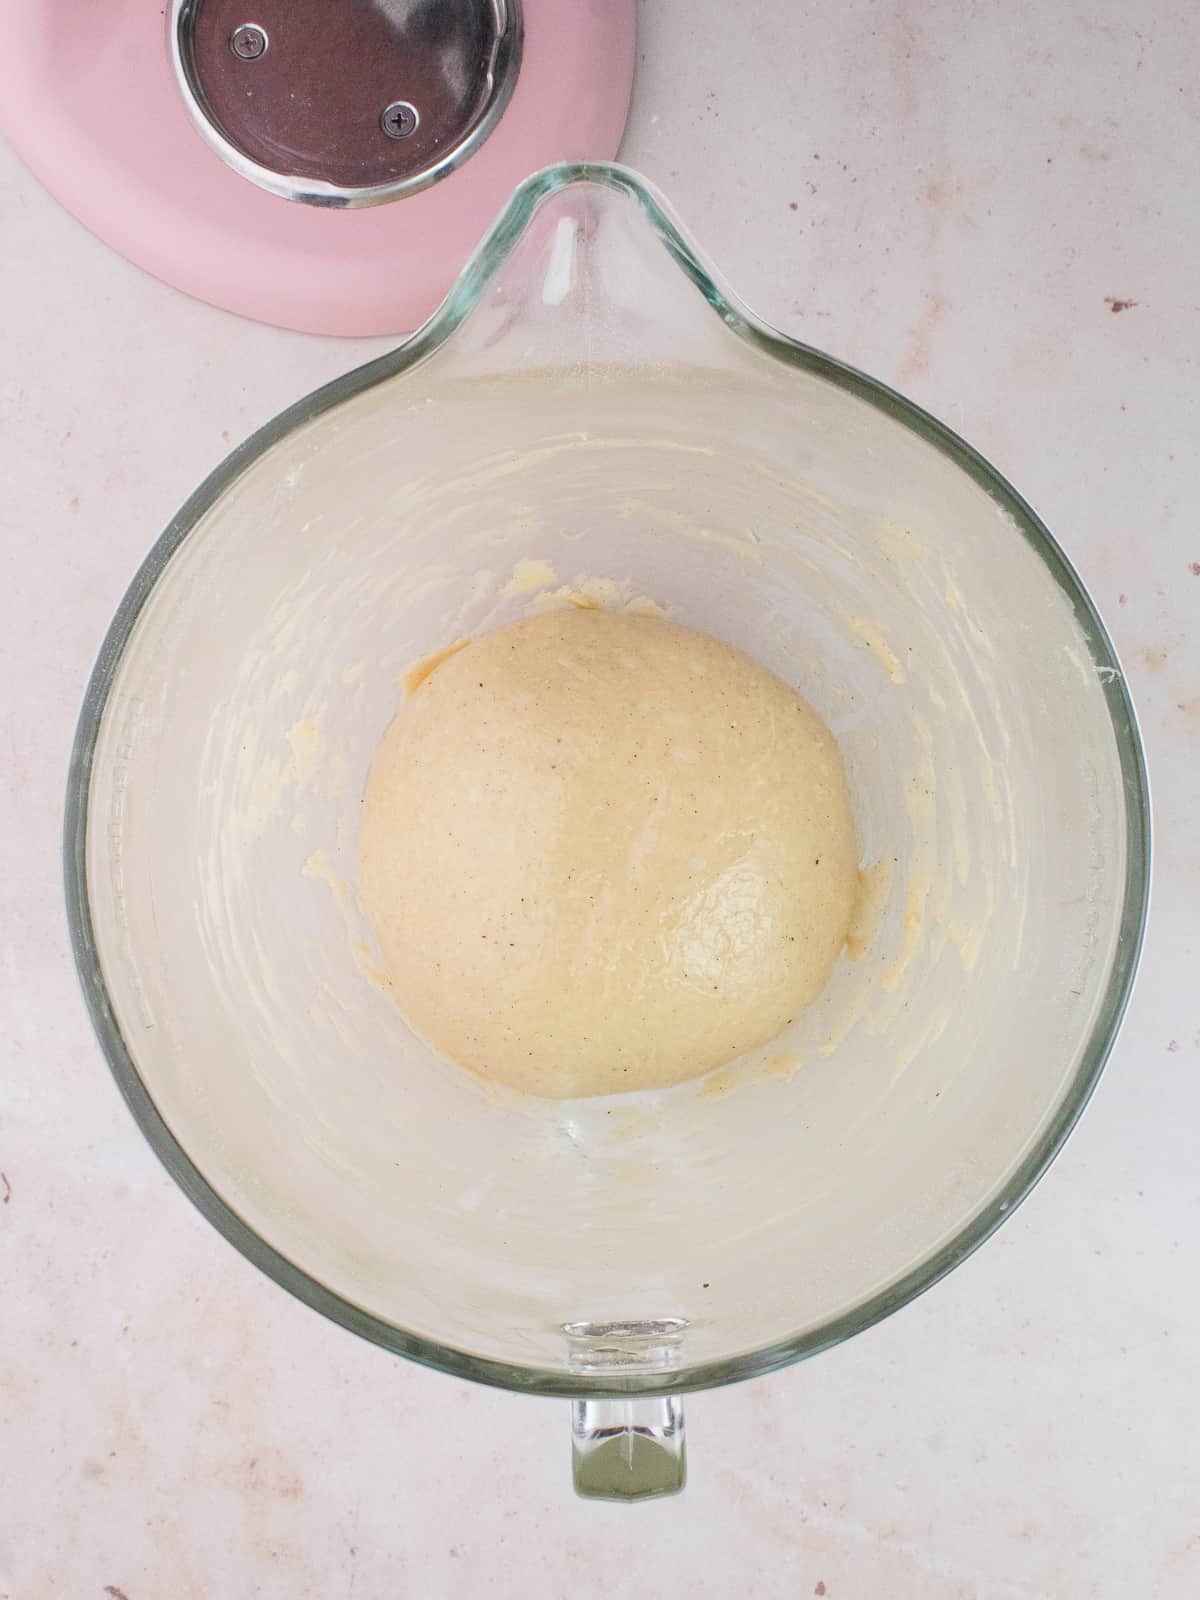 Kneaded dough in an oiled glass bowl